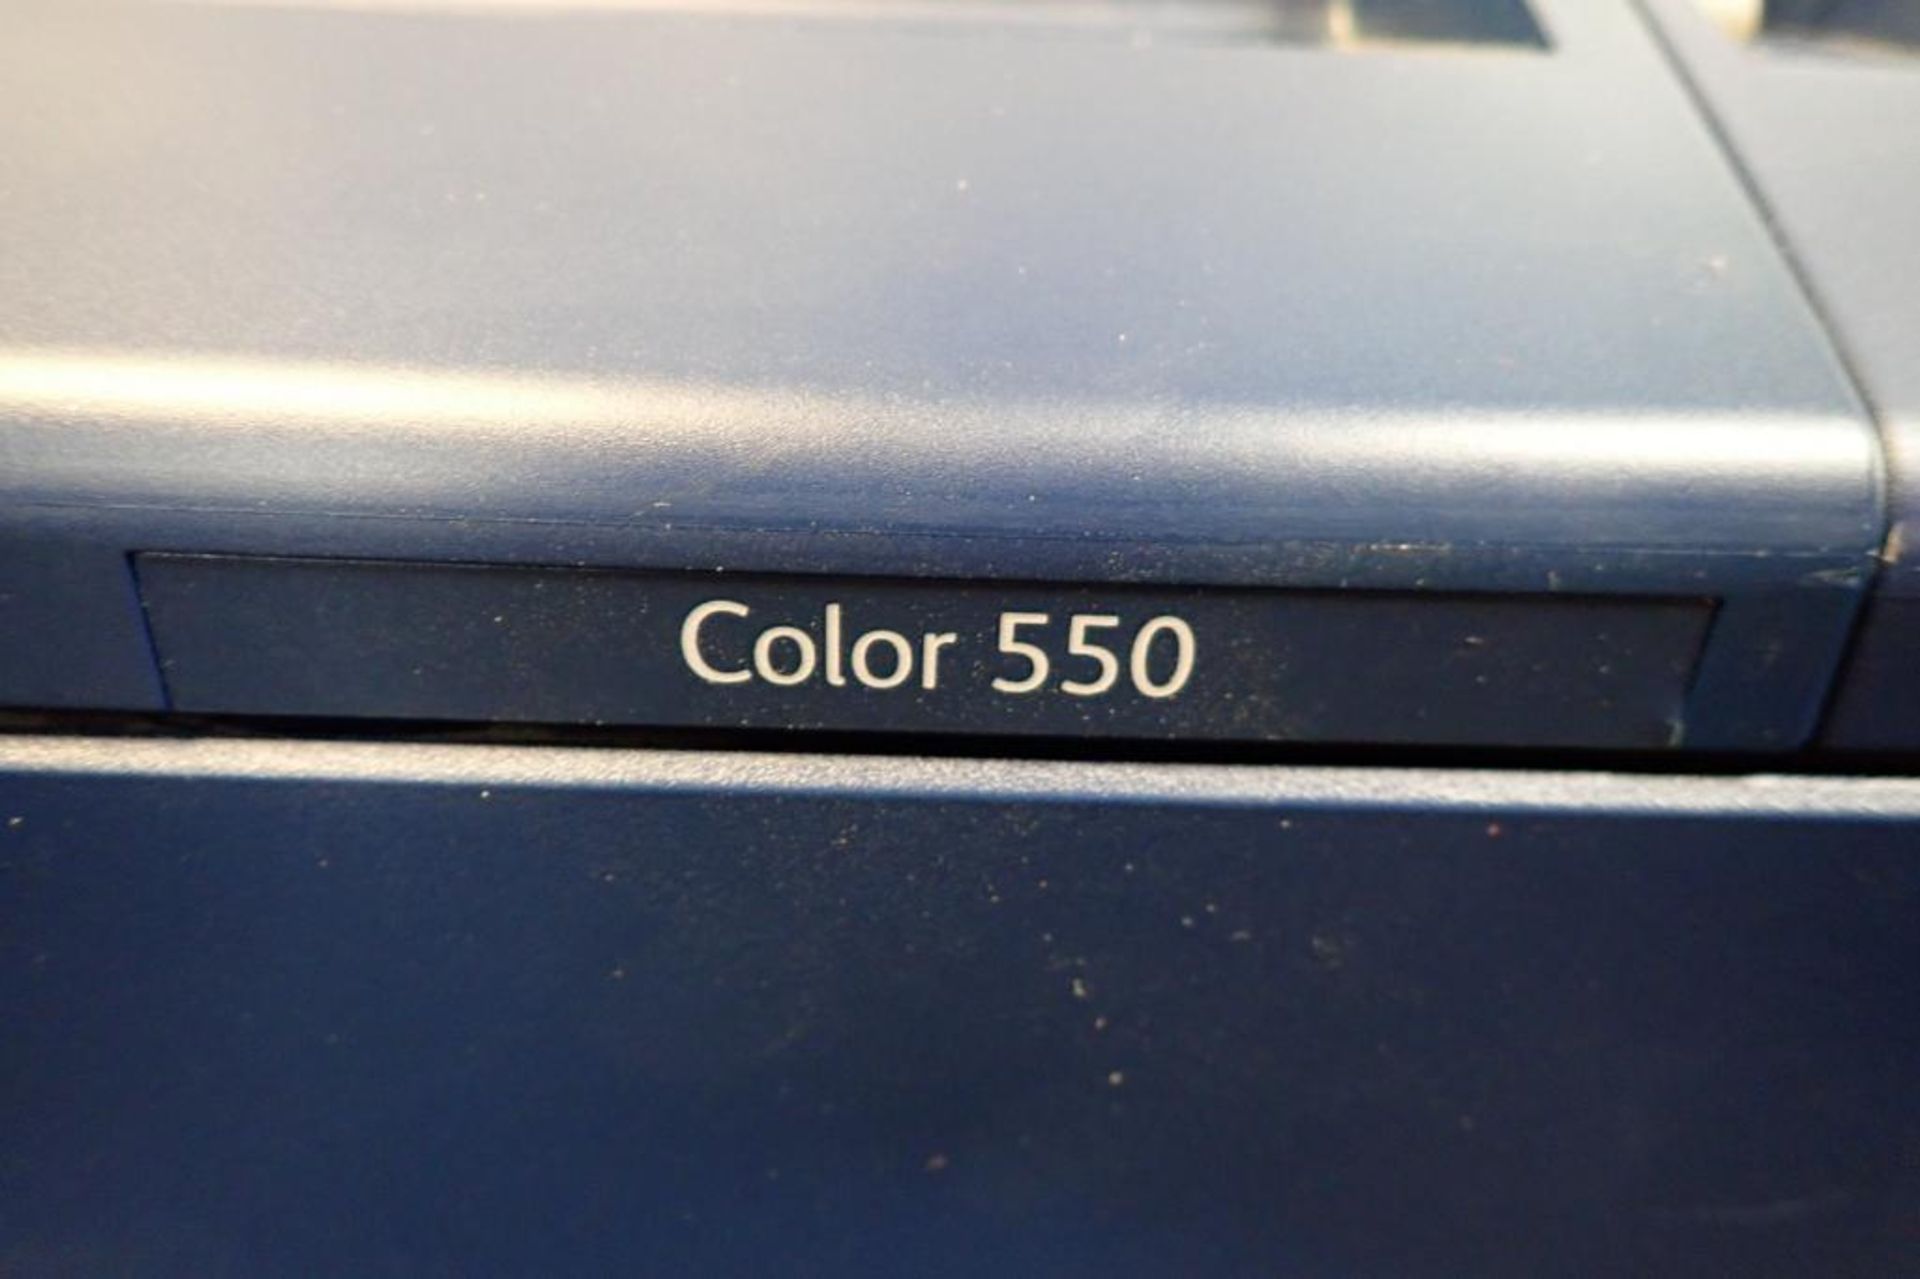 Xerox color 550 office printer/scanner/fax machine - Image 6 of 7